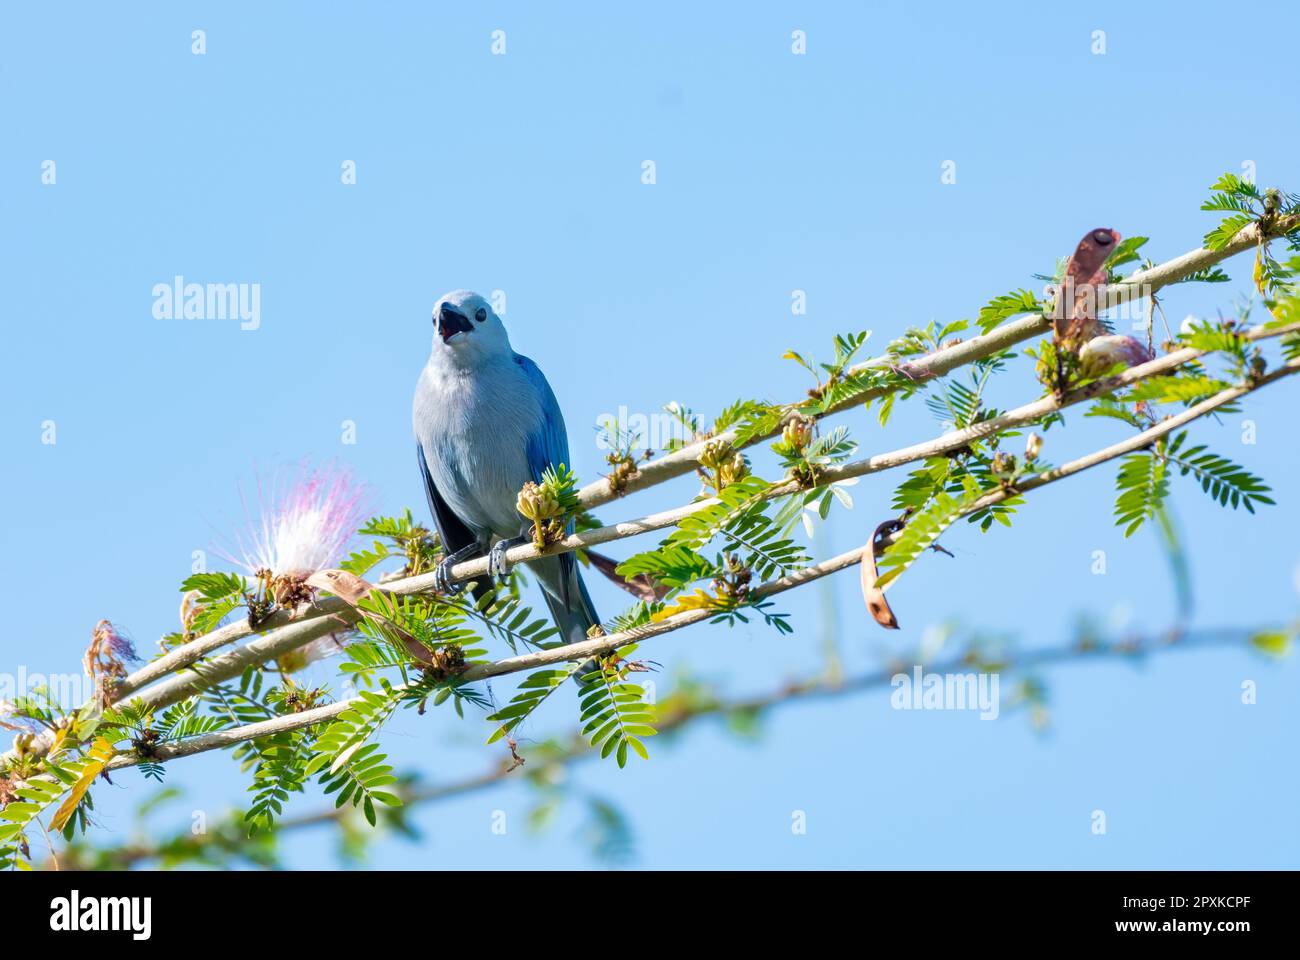 A Blue-gray Tanager, Thraupis episcopus, perched in a Calliandra tree singing in the morning sunlight. Stock Photo